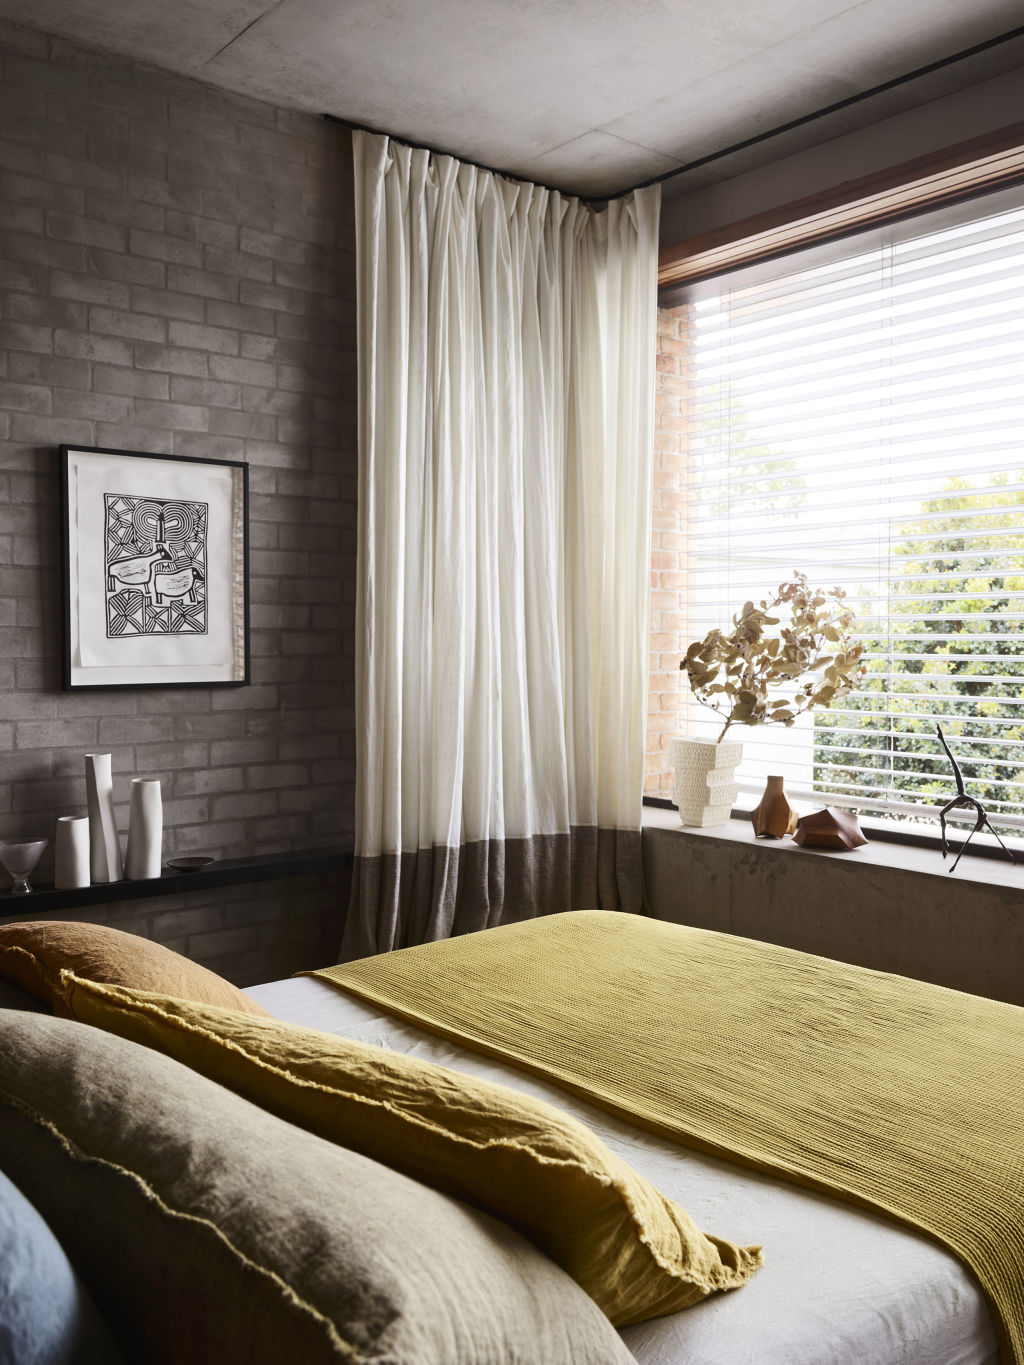 The main bedroom enjoys a leafy green outlook from its window. Photo: Supplied